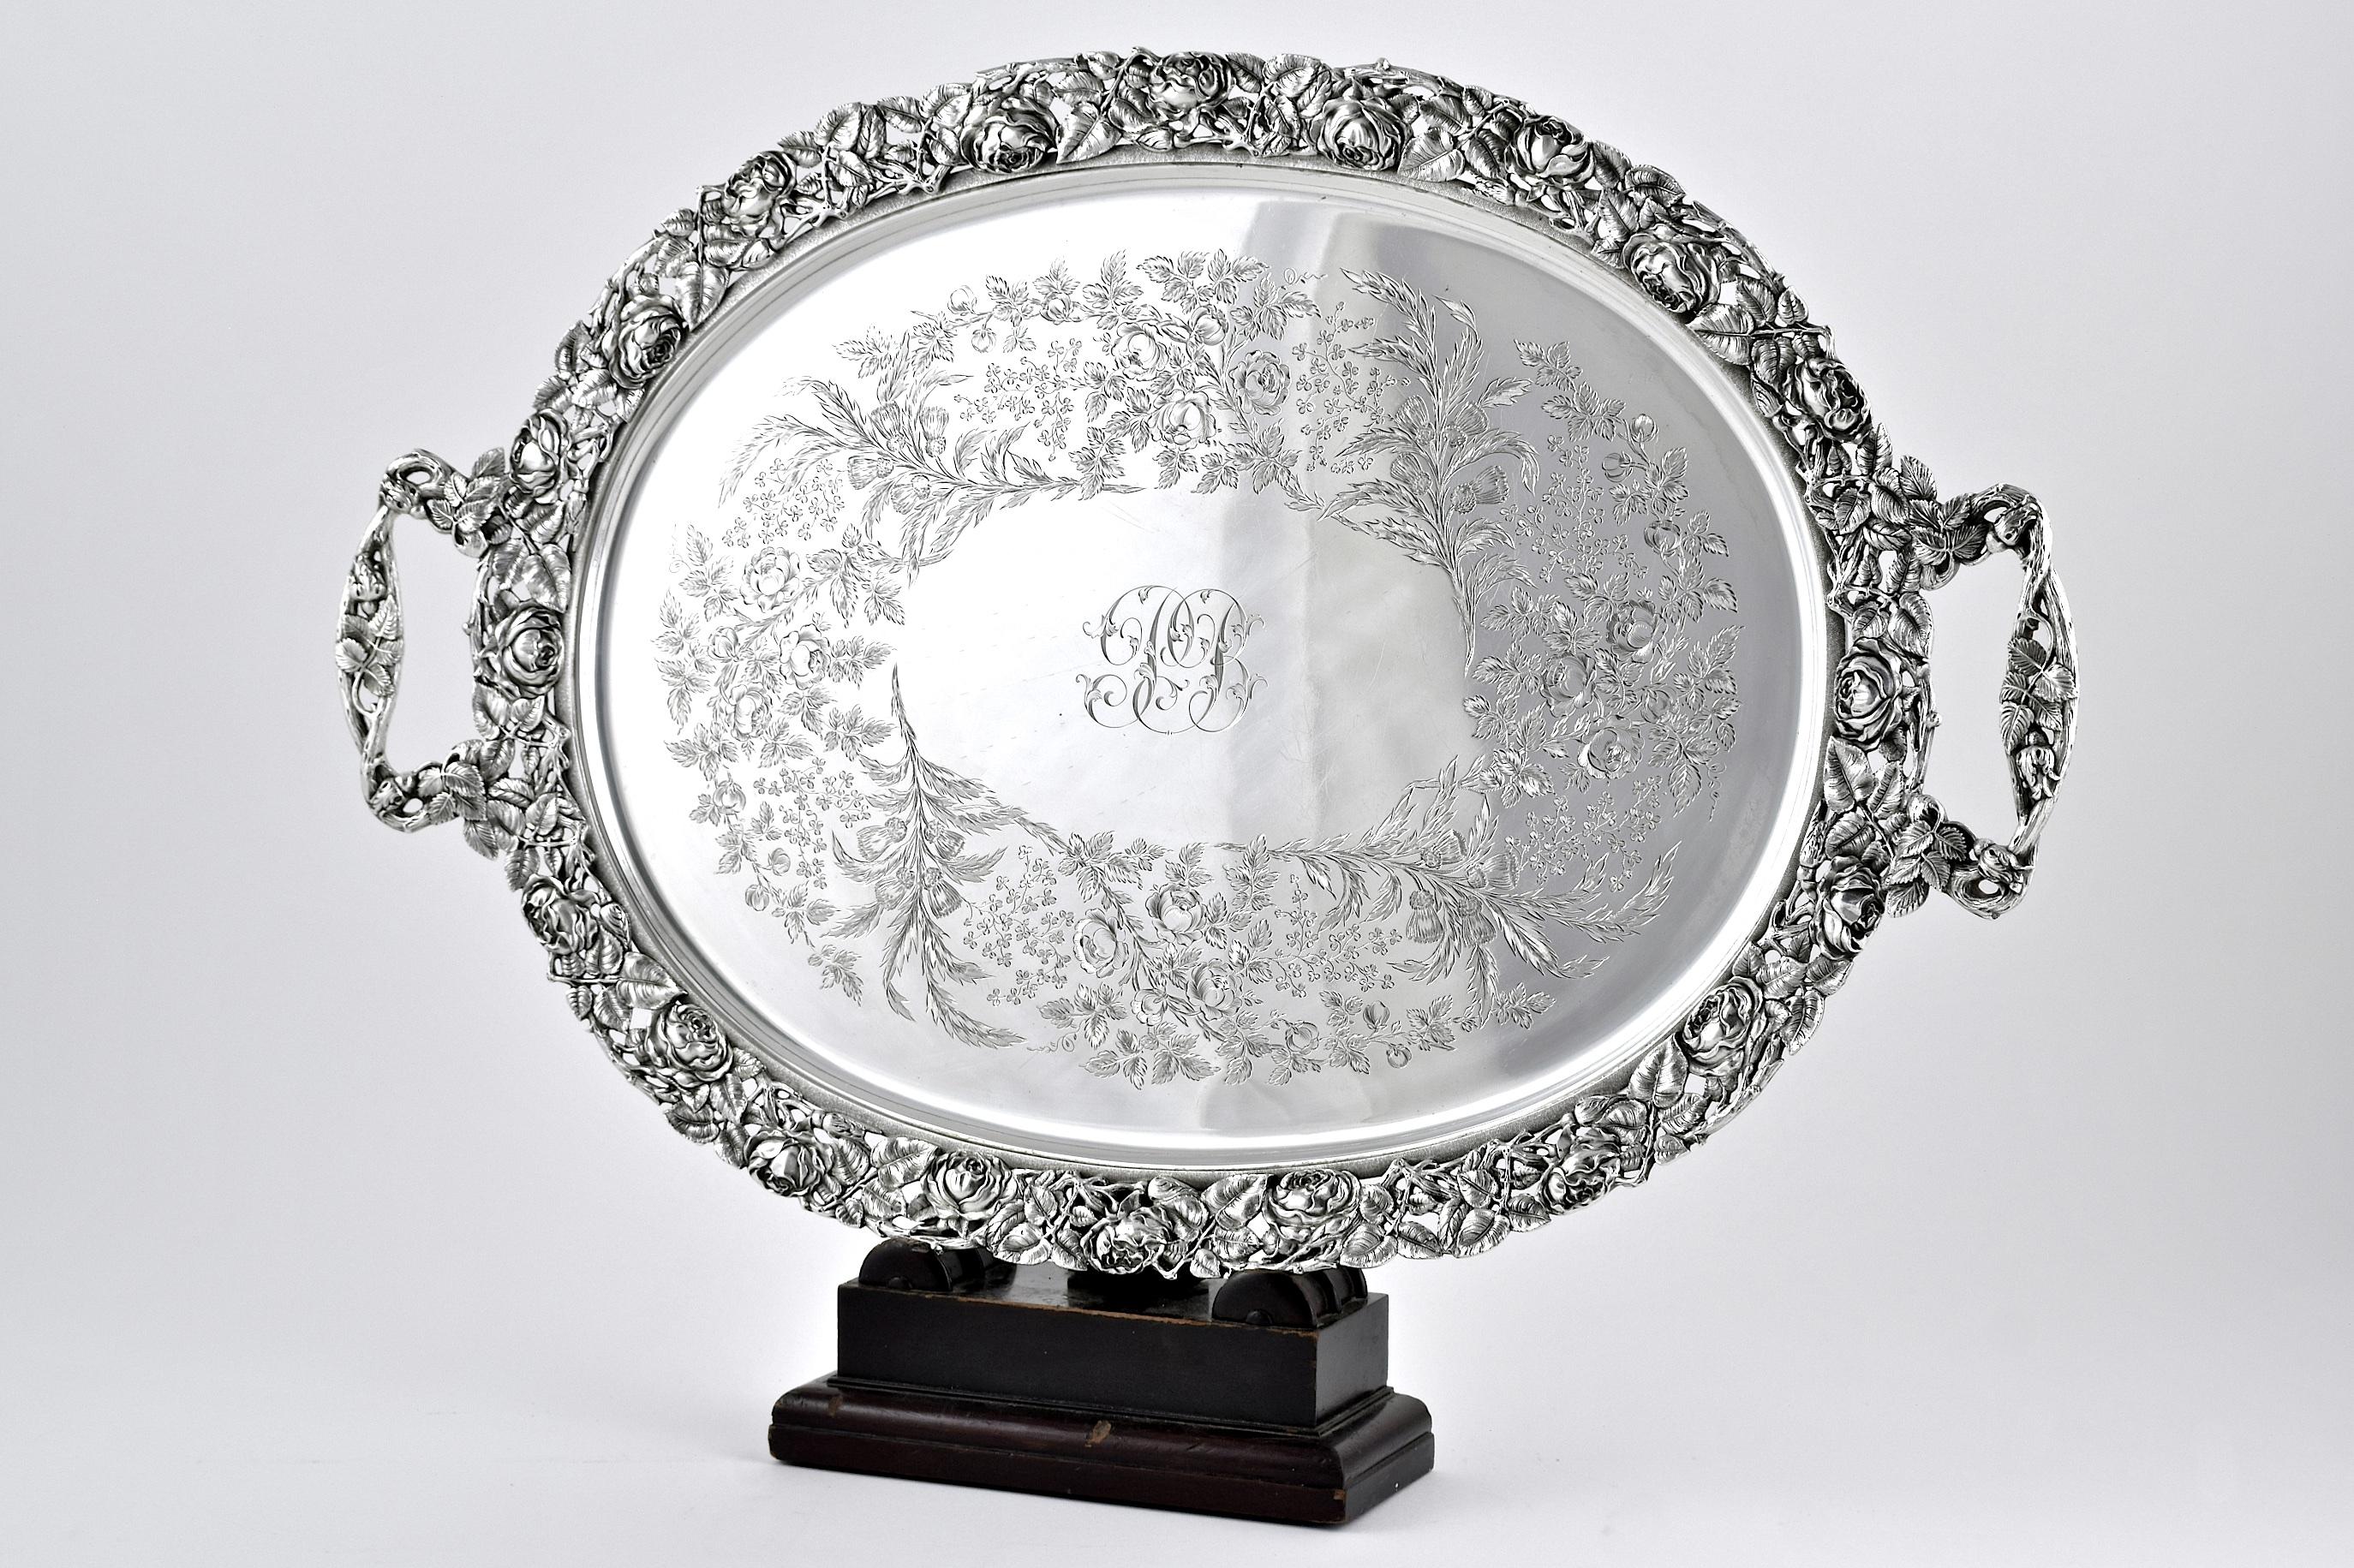 With Hallmarks for Mappin & Webb, London 1918

The fine & heavy quality cast boarder and handles decorated with roses, the centre of the tray engraved with roses, thistles & clover. The very centre of the tray engraved with script initials